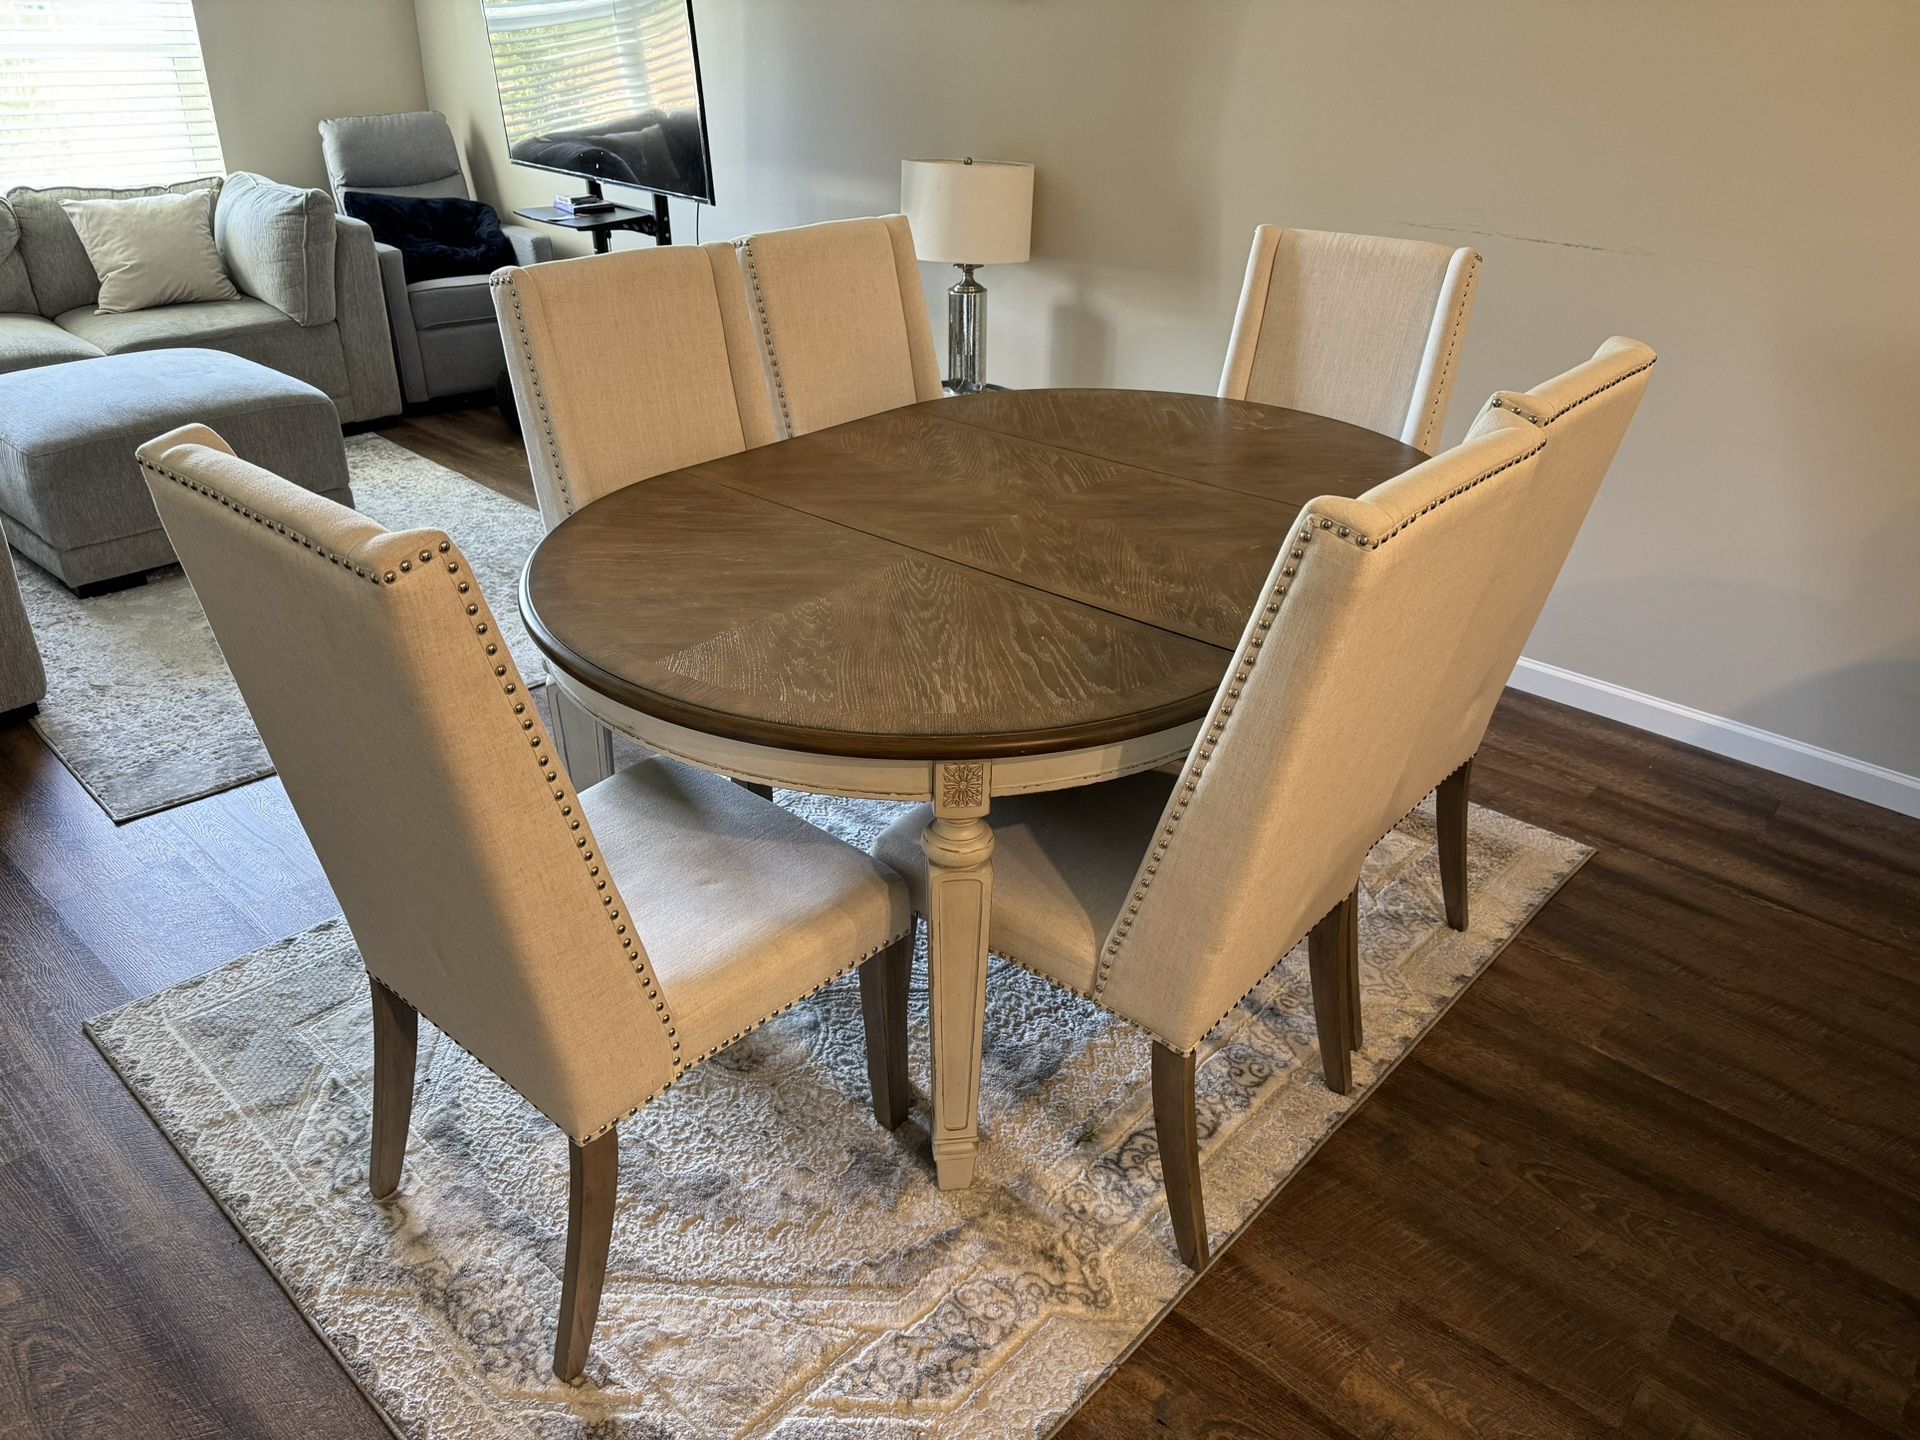 Dining Table For 6 With Chairs